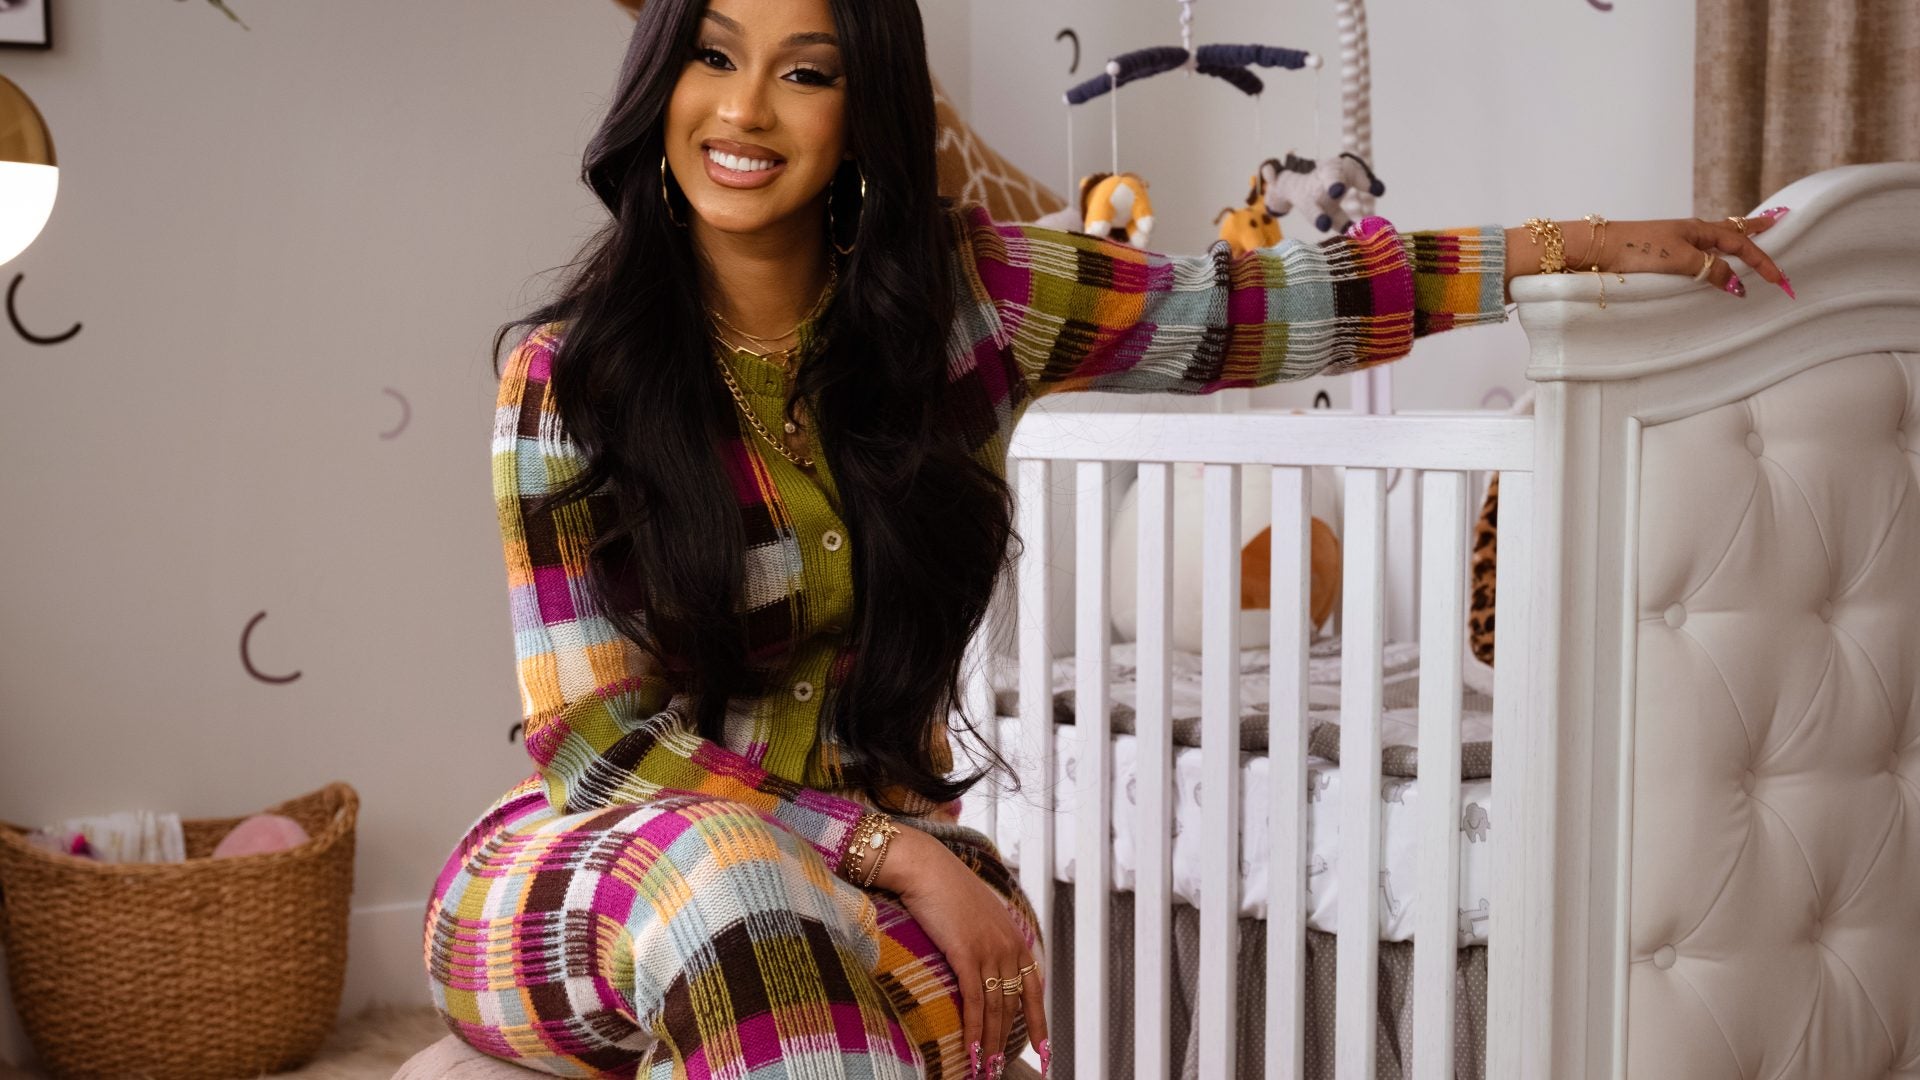 Cardi B and Janelle James Share Their Ultimate Mom Hacks For Walmart In New Ad Campaign